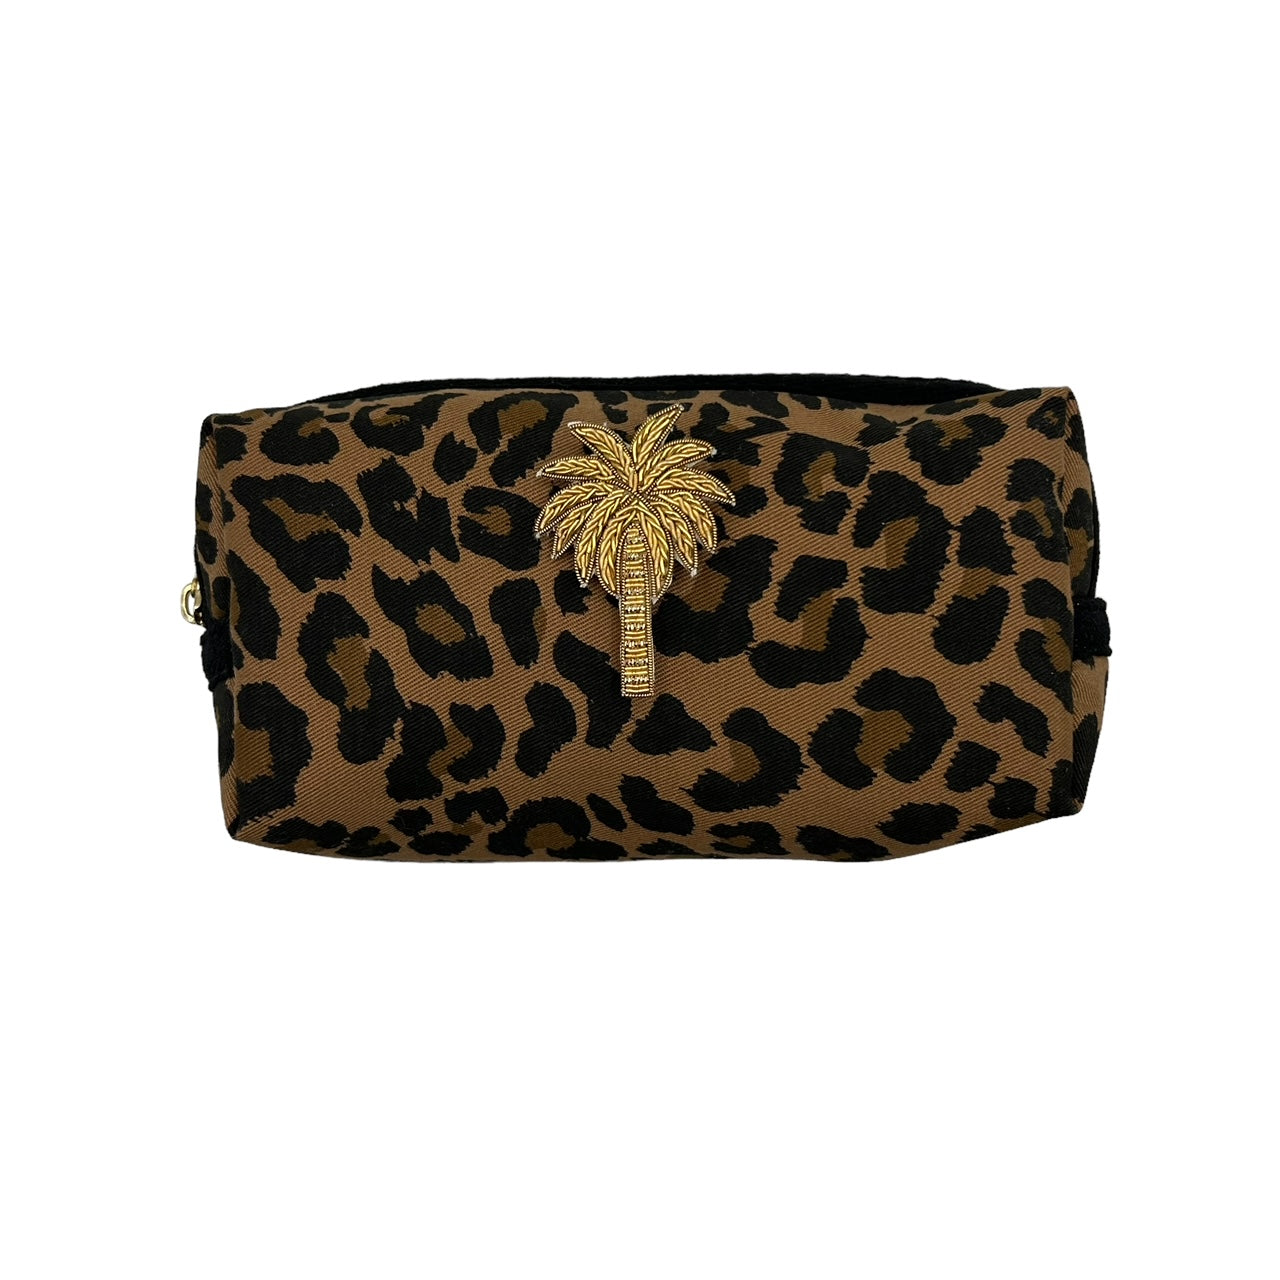 Leopard print make-up bag, large and small, with a palm tree brooch